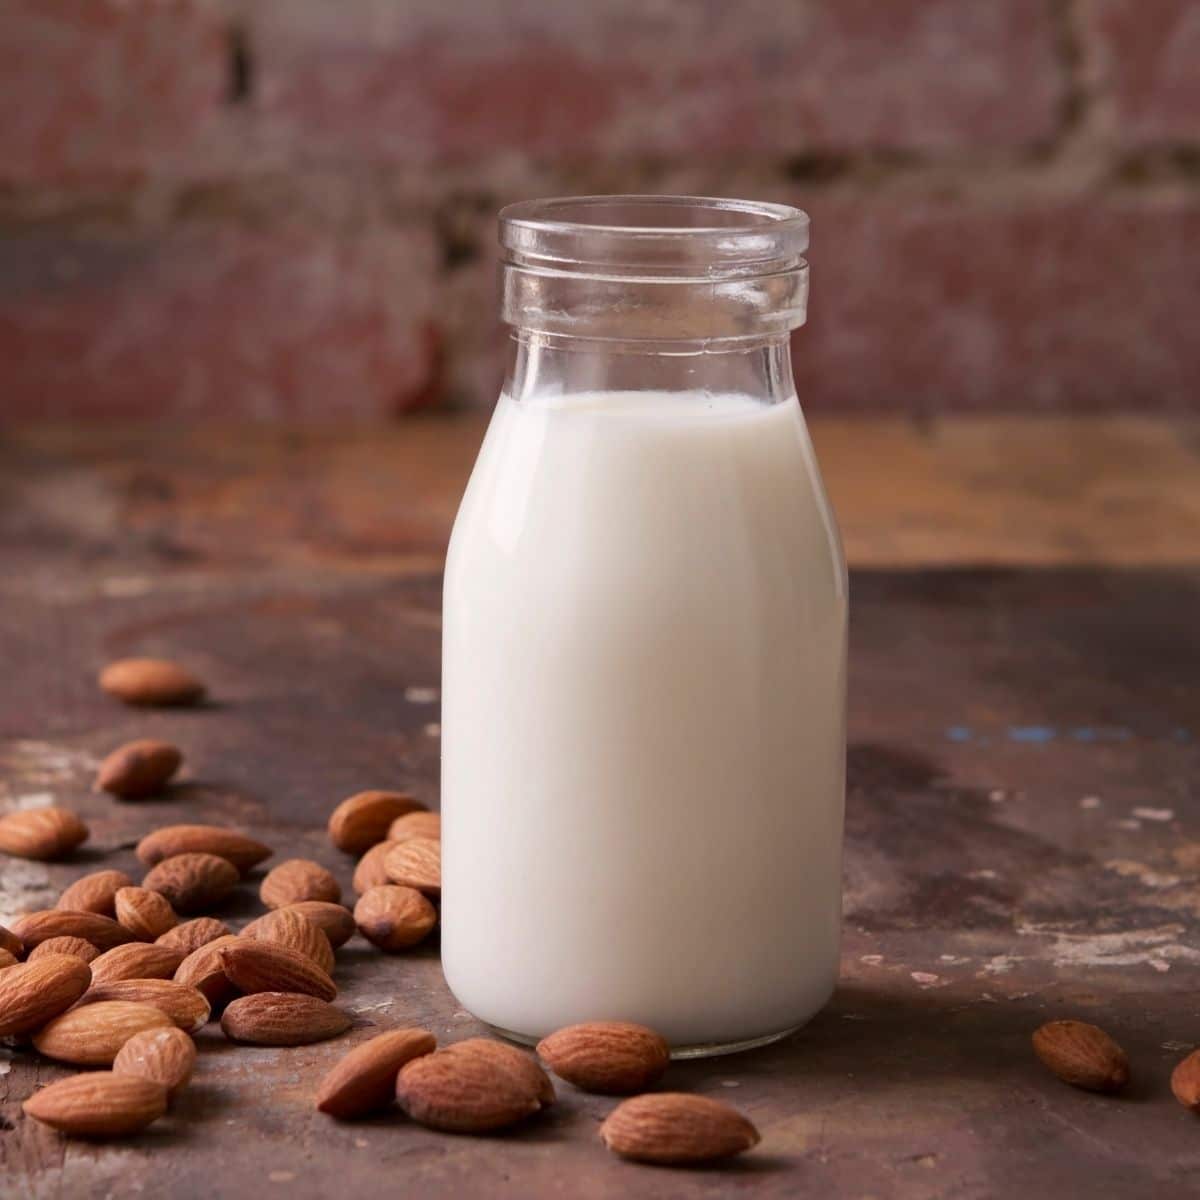 Can You Heat Up Almond Milk In A Microwave?